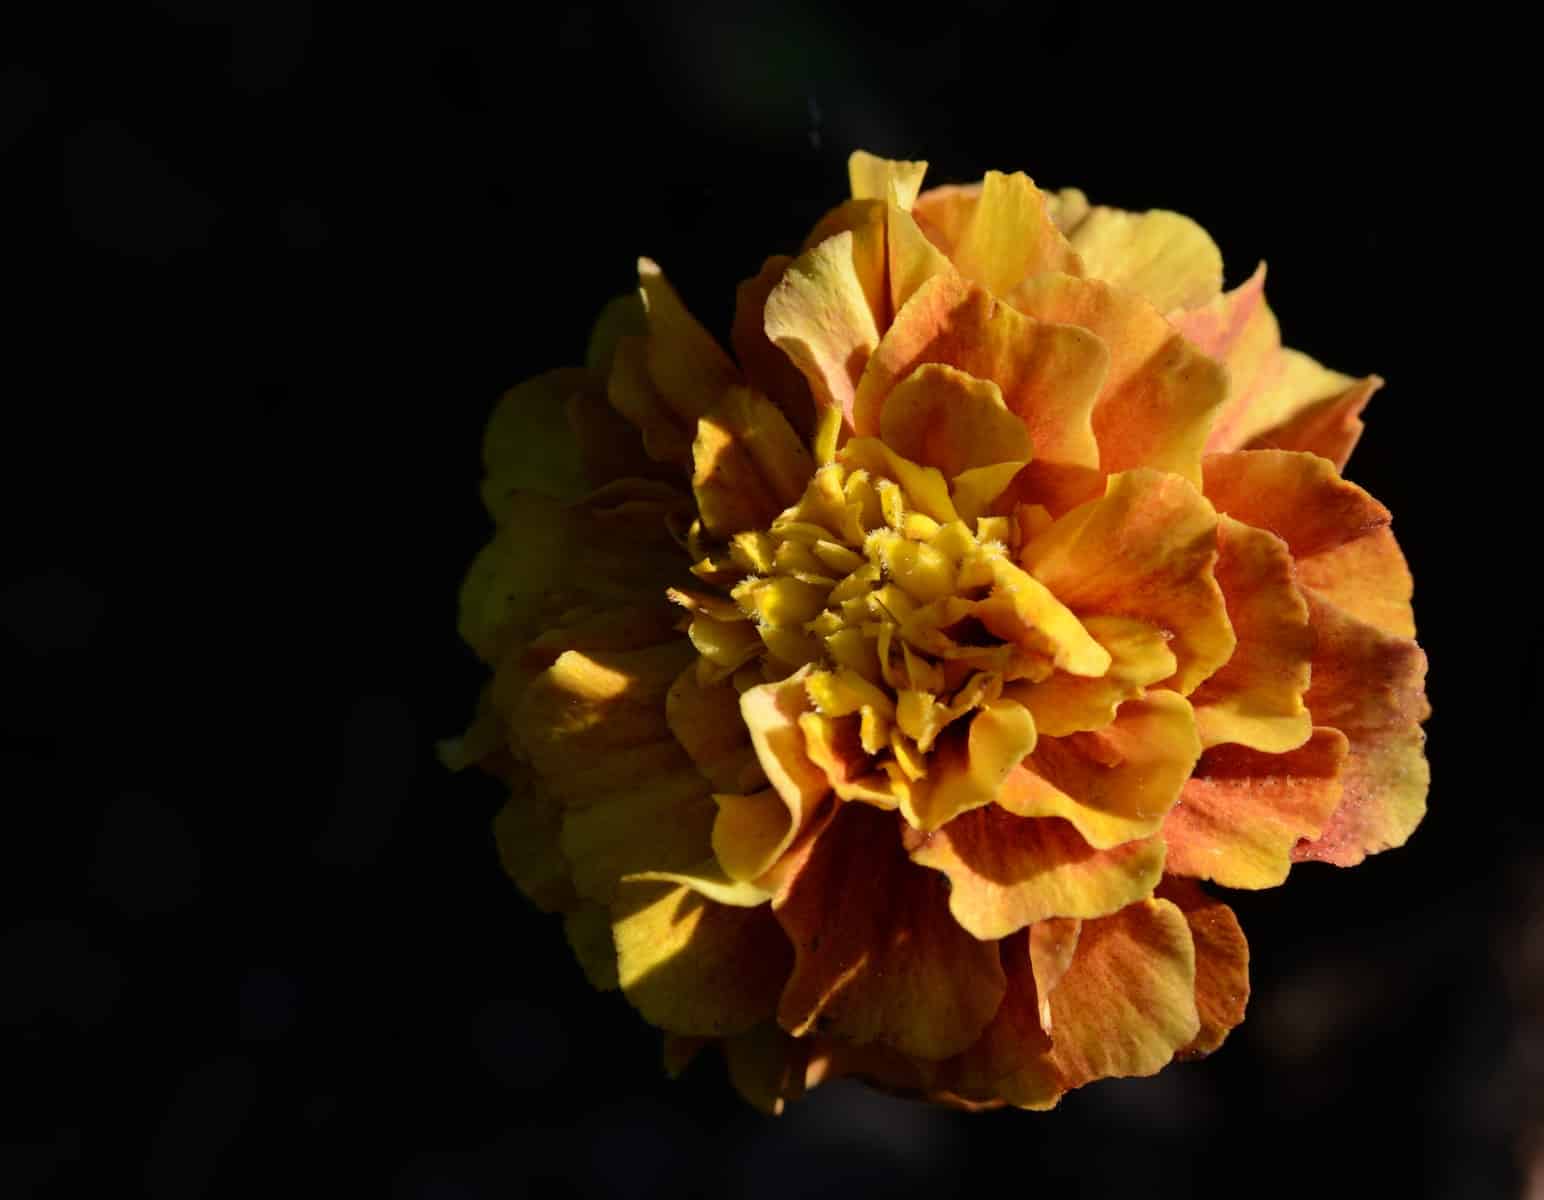 e6k 4h9w6ce Marigold Flower: Meaning, Properties, Uses & How to Grow 1